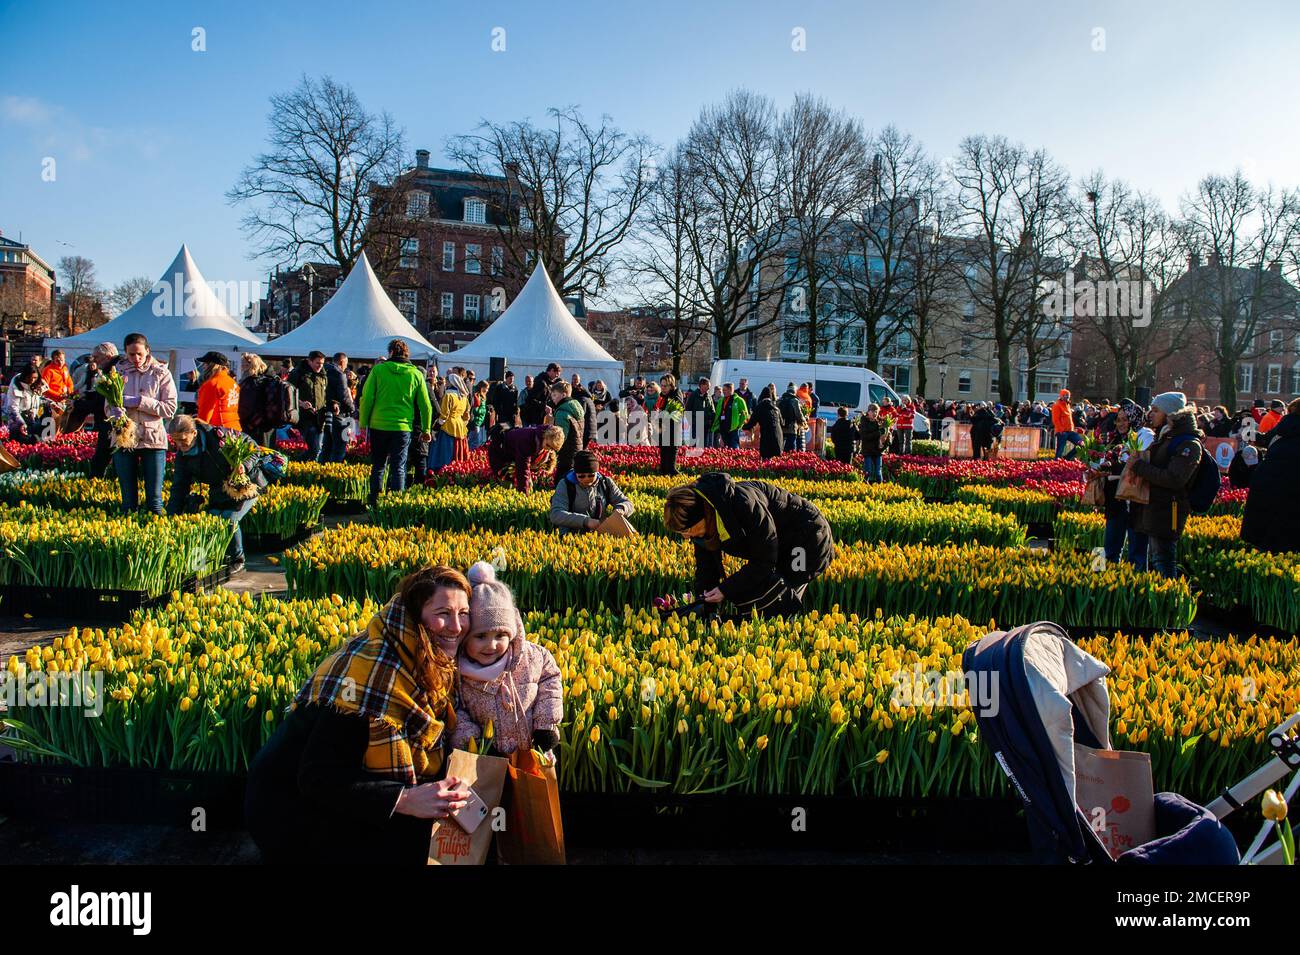 A woman seen posing with her daughter surrounded by hundreds of tulips. Each year on the 3rd Saturday of January, the National Tulip Day is celebrated in Amsterdam. Dutch tulip growers built a huge picking garden with more than 200,000 colorful tulips at the Museumplein in Amsterdam. Visitors are allowed to pick tulips for free. The event was opened by Olympic skating champion, Irene Schouten. Prior to the opening, she christened a new tulip: Tulipa 'Dutch Pearl' as a reference to the world - famous painting 'The girl with a pearl earring' by Johannes Vermeer. Stock Photo